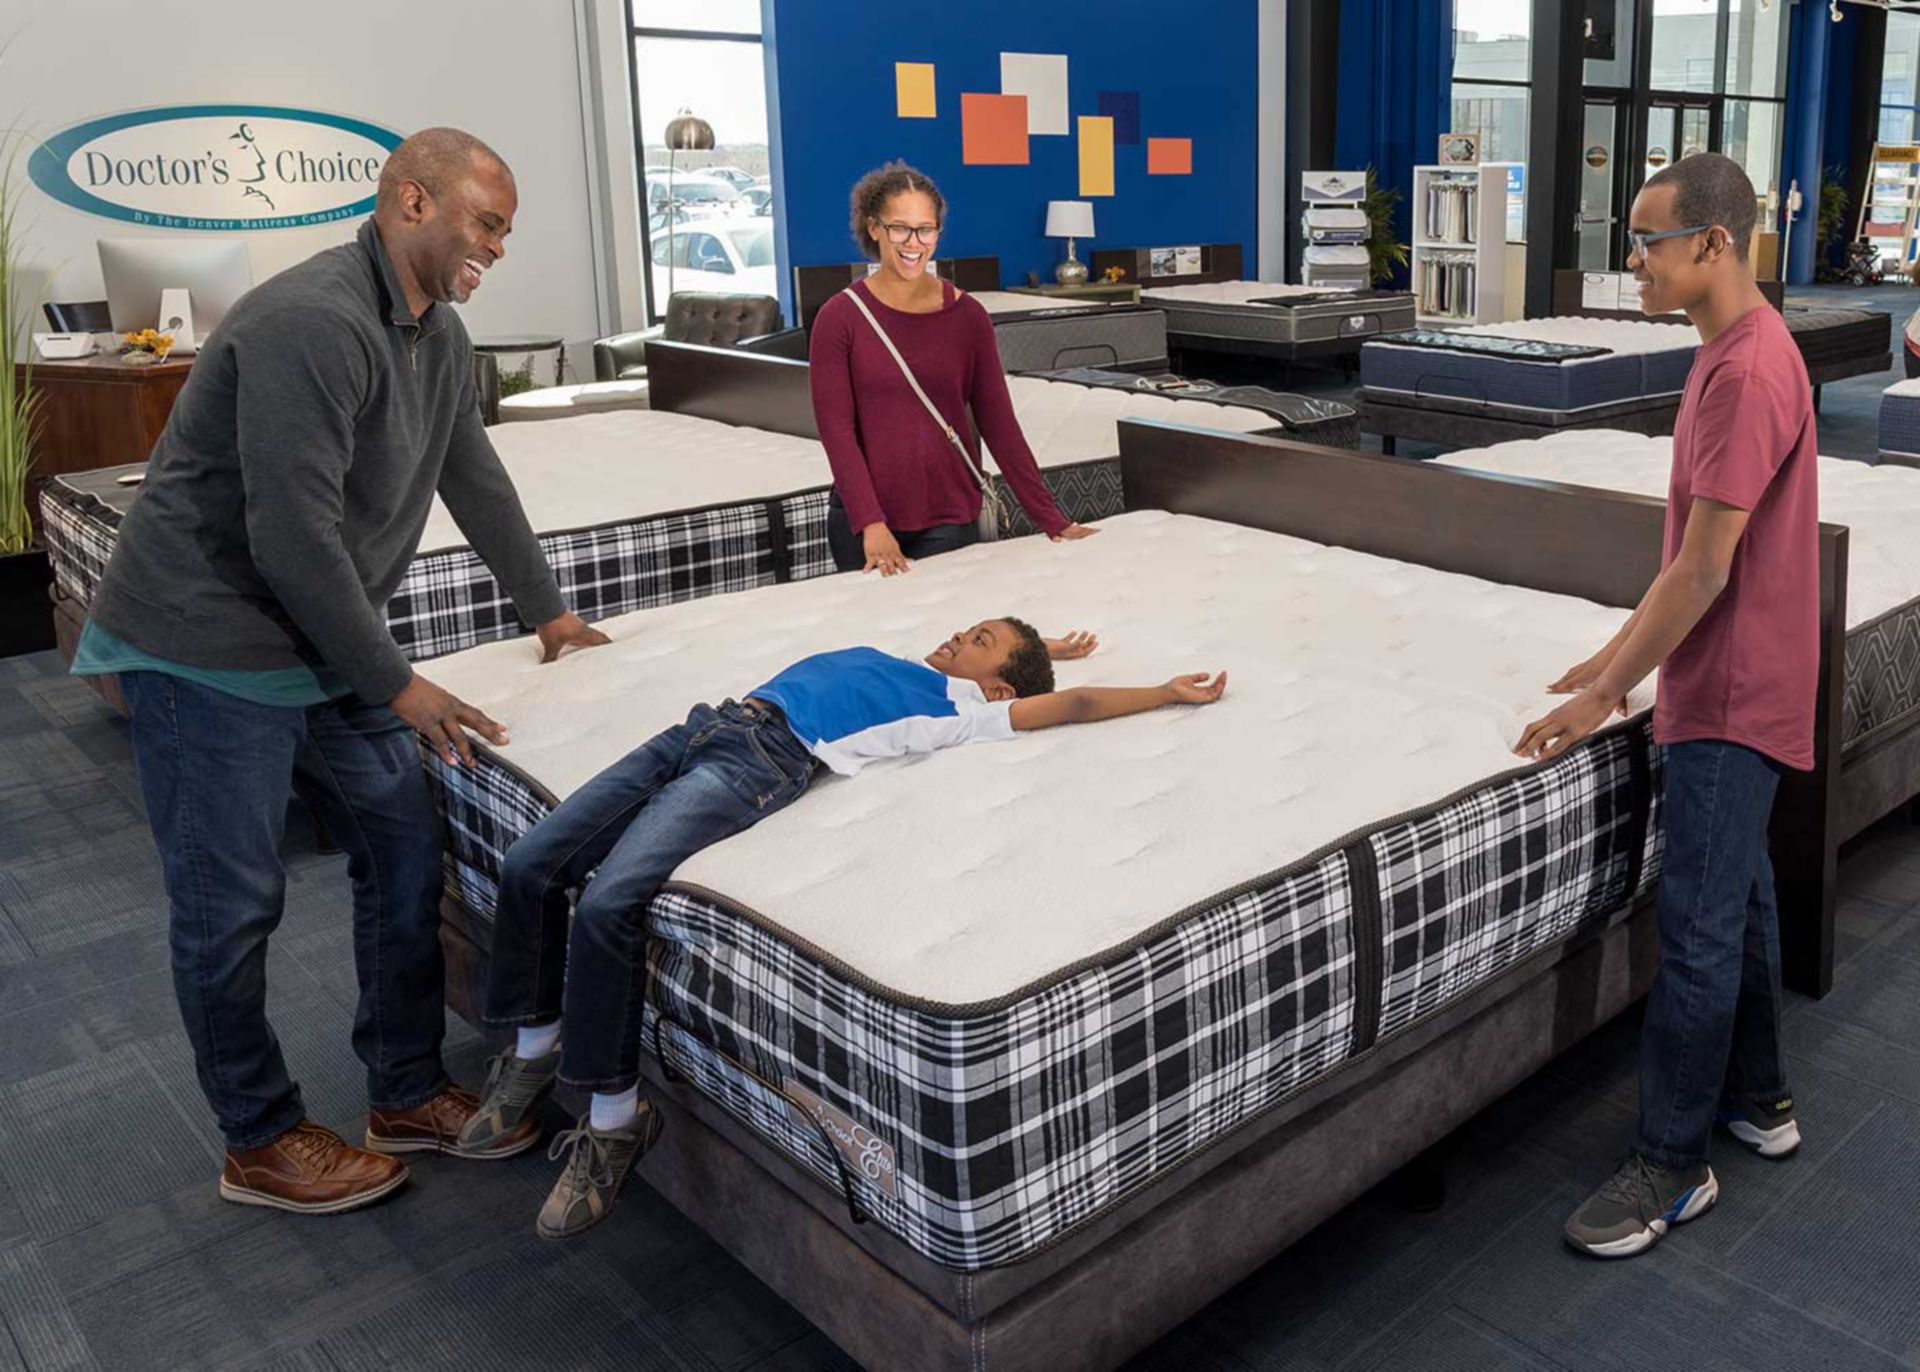 family of 4 browsing a doctor's choice elite mattress